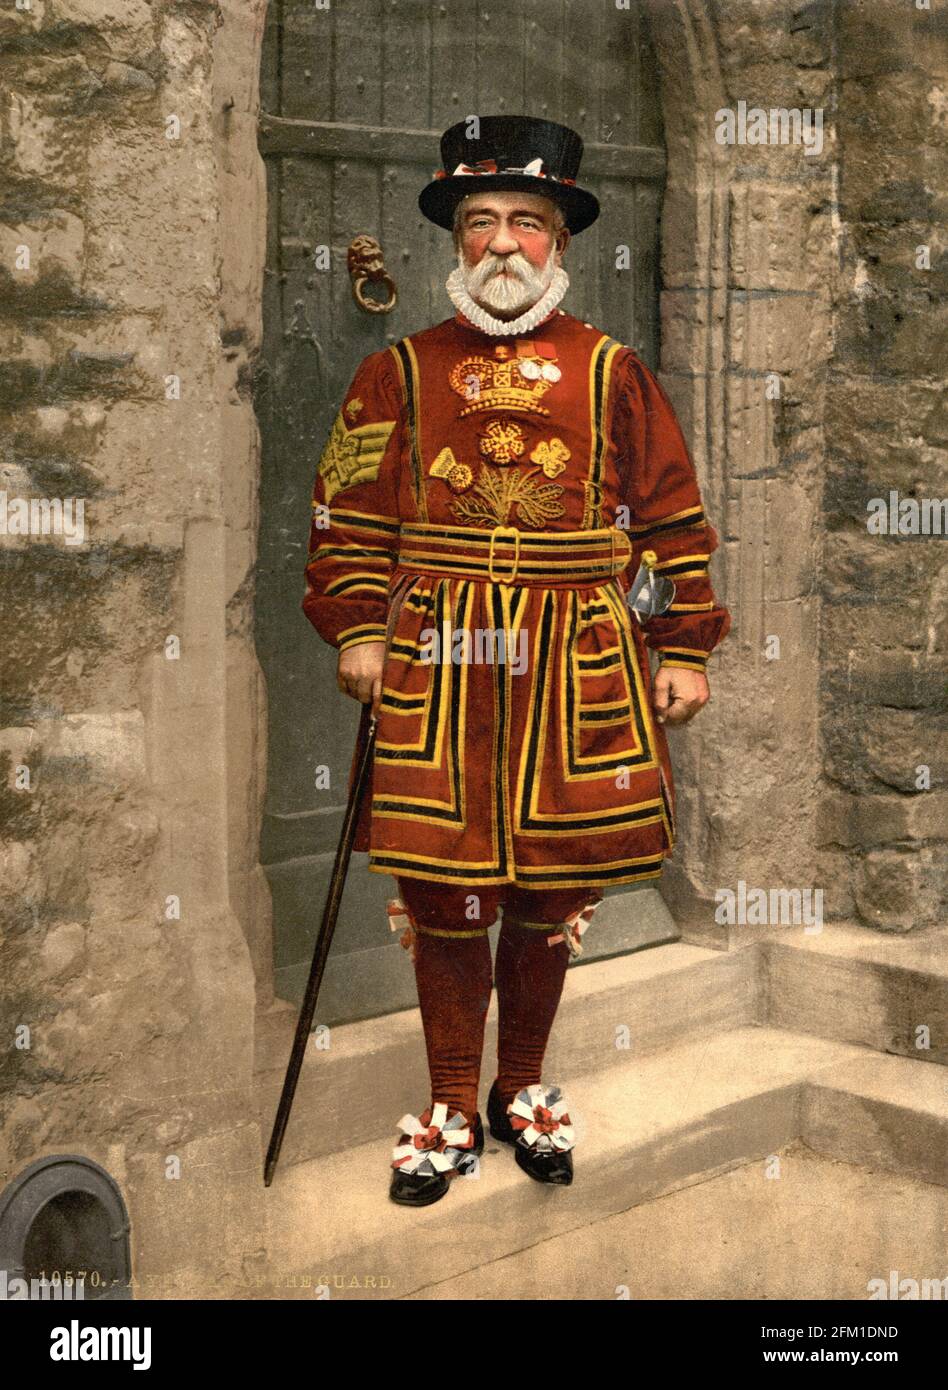 Yeoman of the Guard (Beefeater) London um 1890-1900 Stockfoto